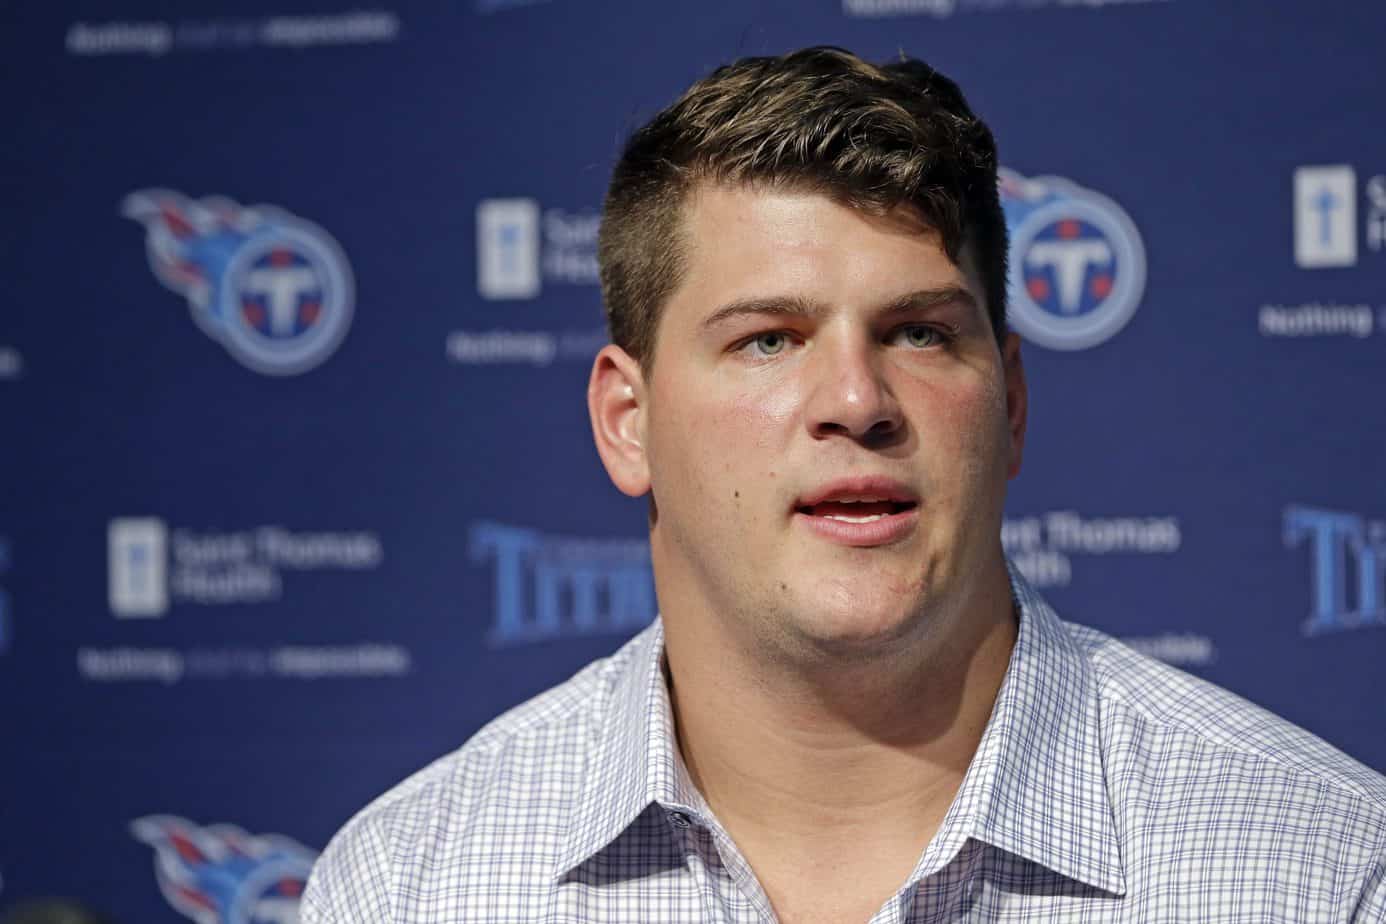 Tennessee Titans announce a positive update on offensive lineman Taylor Lewan after he had to be carted off the field during Monday Night Football